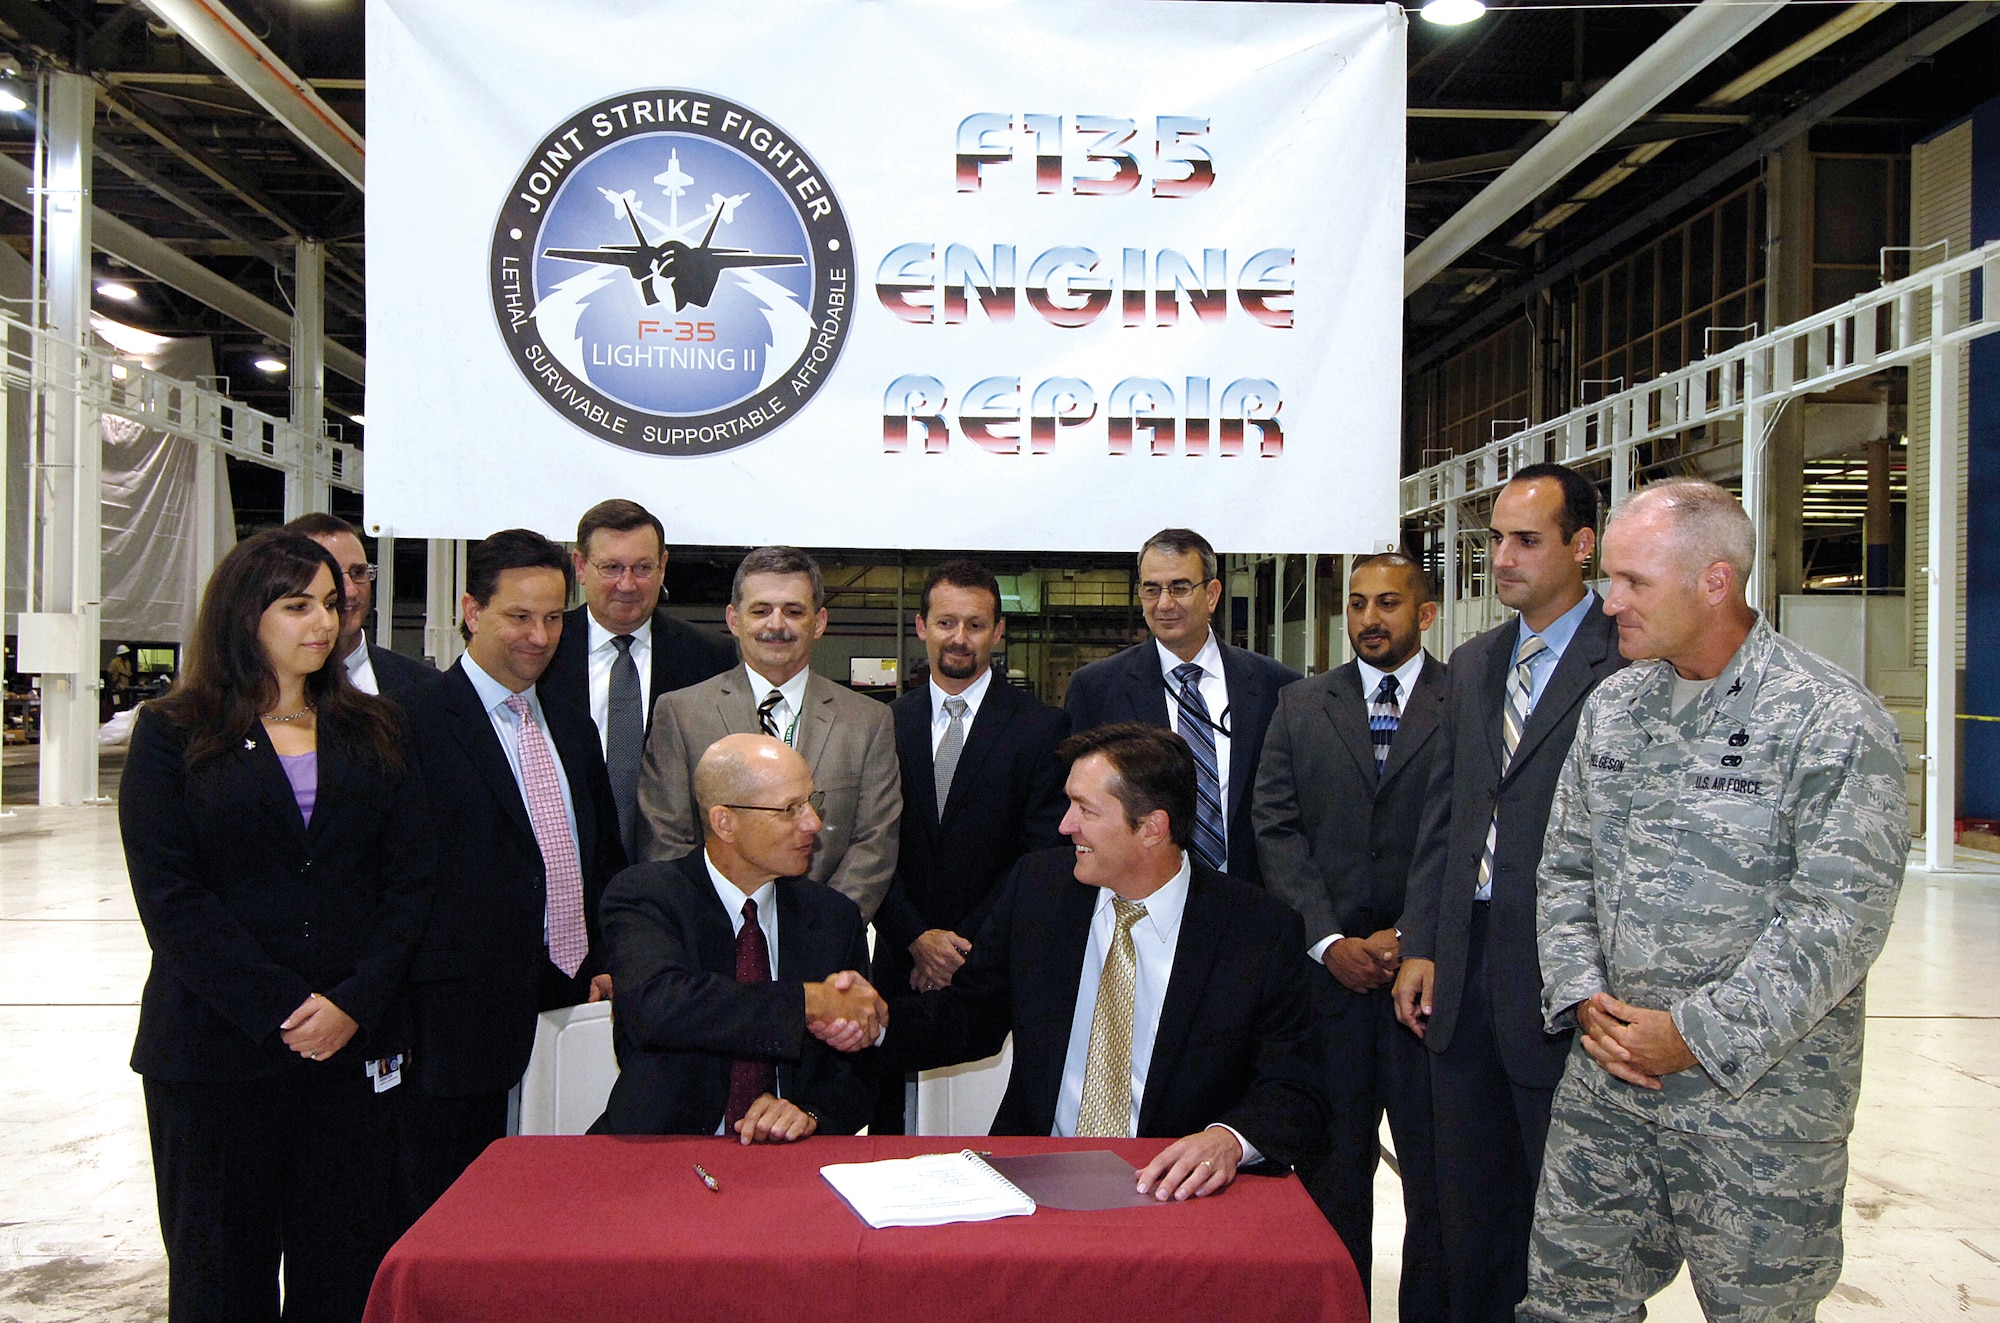 A signature and congratulatory handshake make it official Aug. 30 when Oklahoma City Air Logistics Complex Vice Director Kevin O’Connor, seated right, and Pratt & Whitney President of Military Aftermarket Services Douglas Cleary, signed an implementation agreement for F135 engine work. The F135 engine, which powers the F-35 Joint Strike Fighter aircraft, will be jointly maintained in the Bldg. 3001 area behind the signers, which is currently being transformed into a dedicated repair area for the engine. (Air Force photo by Margo Wright)